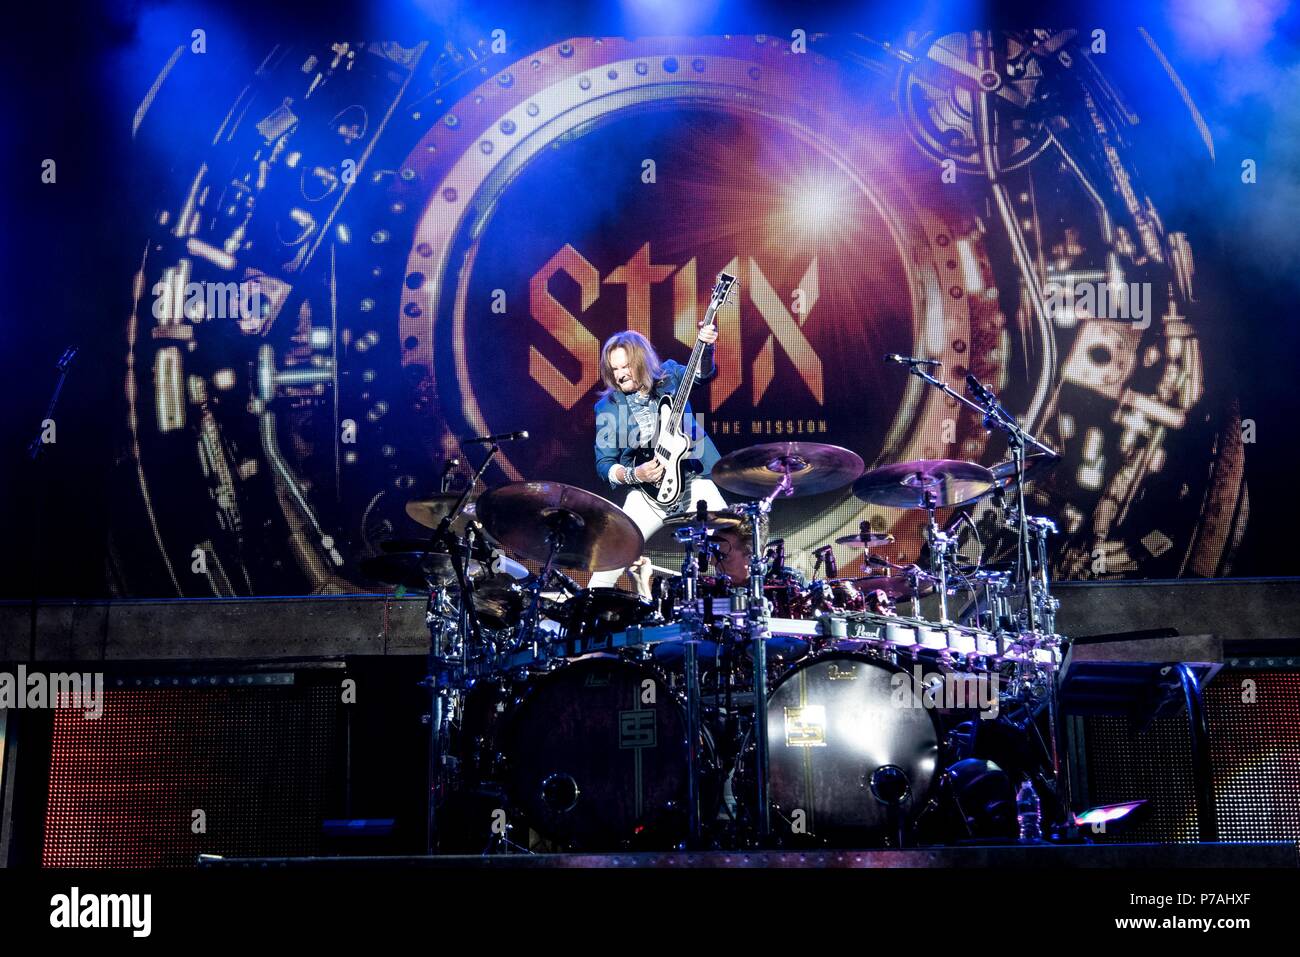 Toronto, Ontario, Canada. 4th July, 2018. American rock band STYX perfromed at Budweiser Stage in Toronto. Band members: CHUCK PANOZZO, JAMES 'J.Y.' YOUNG, TOMMY SHAW, TODD SUCHERMAN, LAWRENCE GOWAN, RICKY PHILLIPS Credit: Igor Vidyashev/ZUMA Wire/Alamy Live News Stock Photo